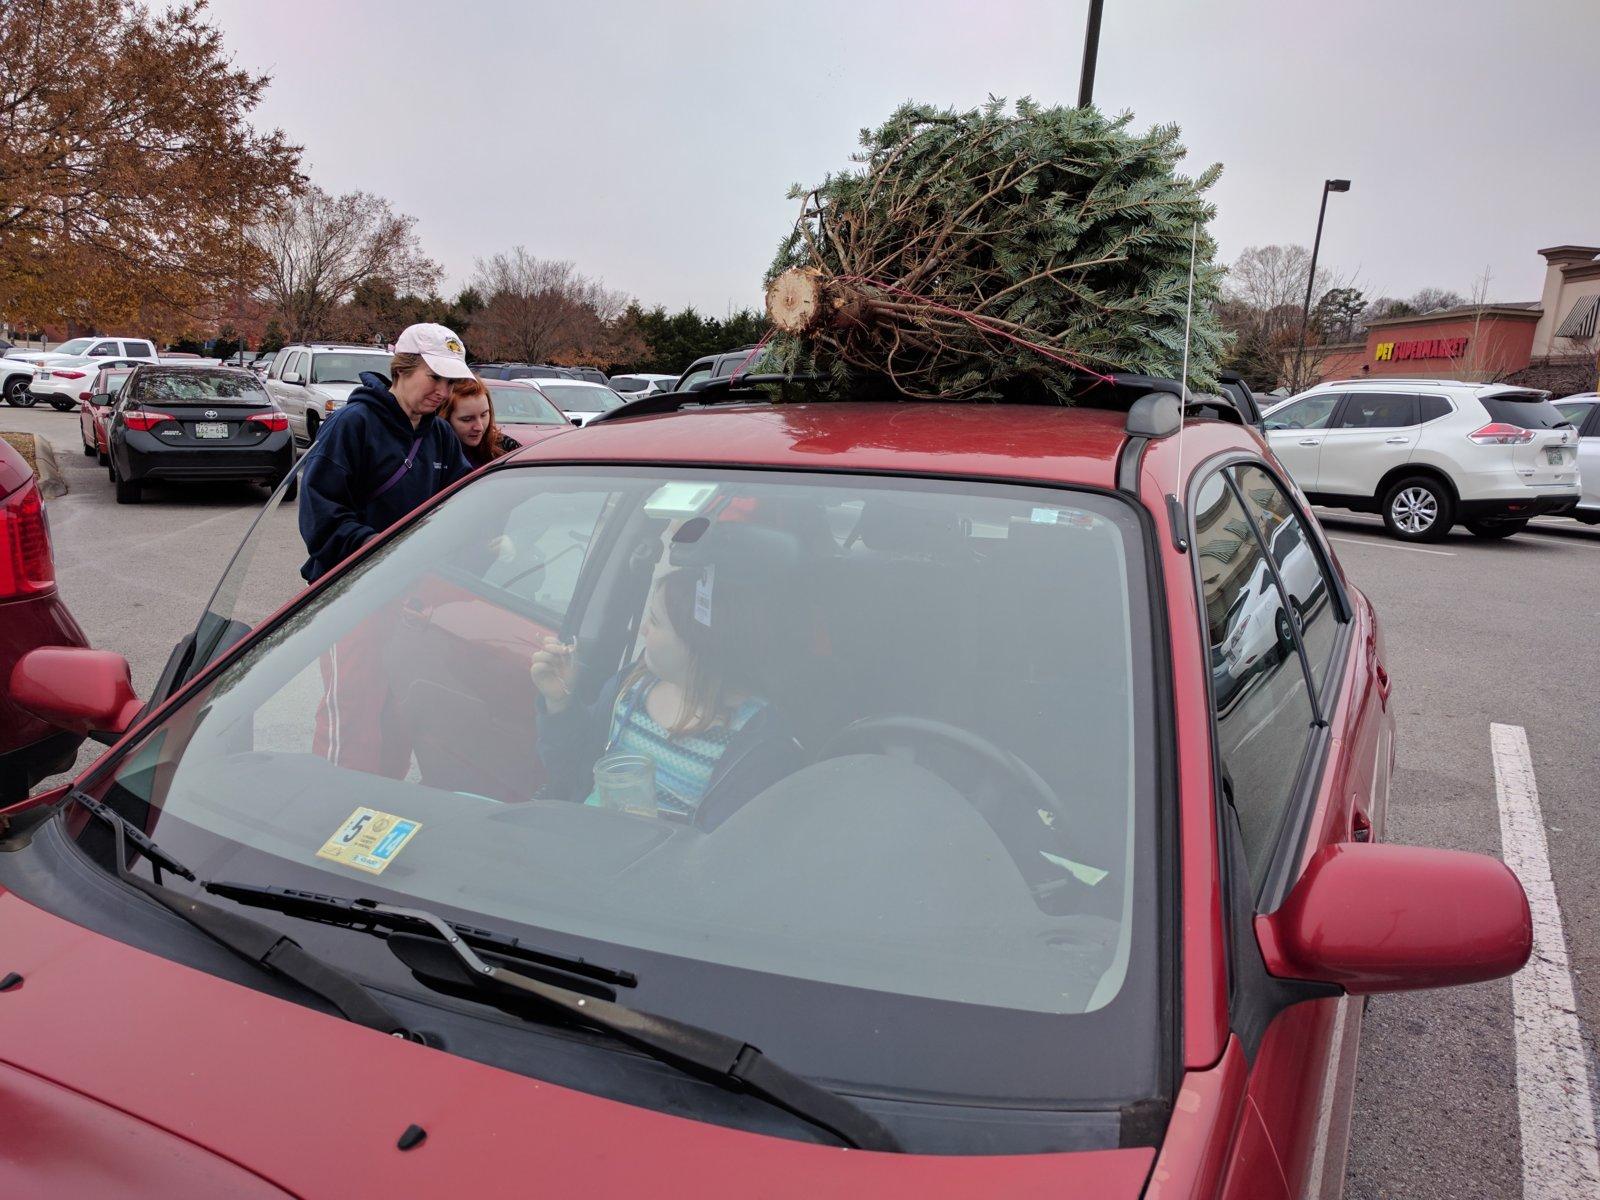 Tree on top, ready to roll.